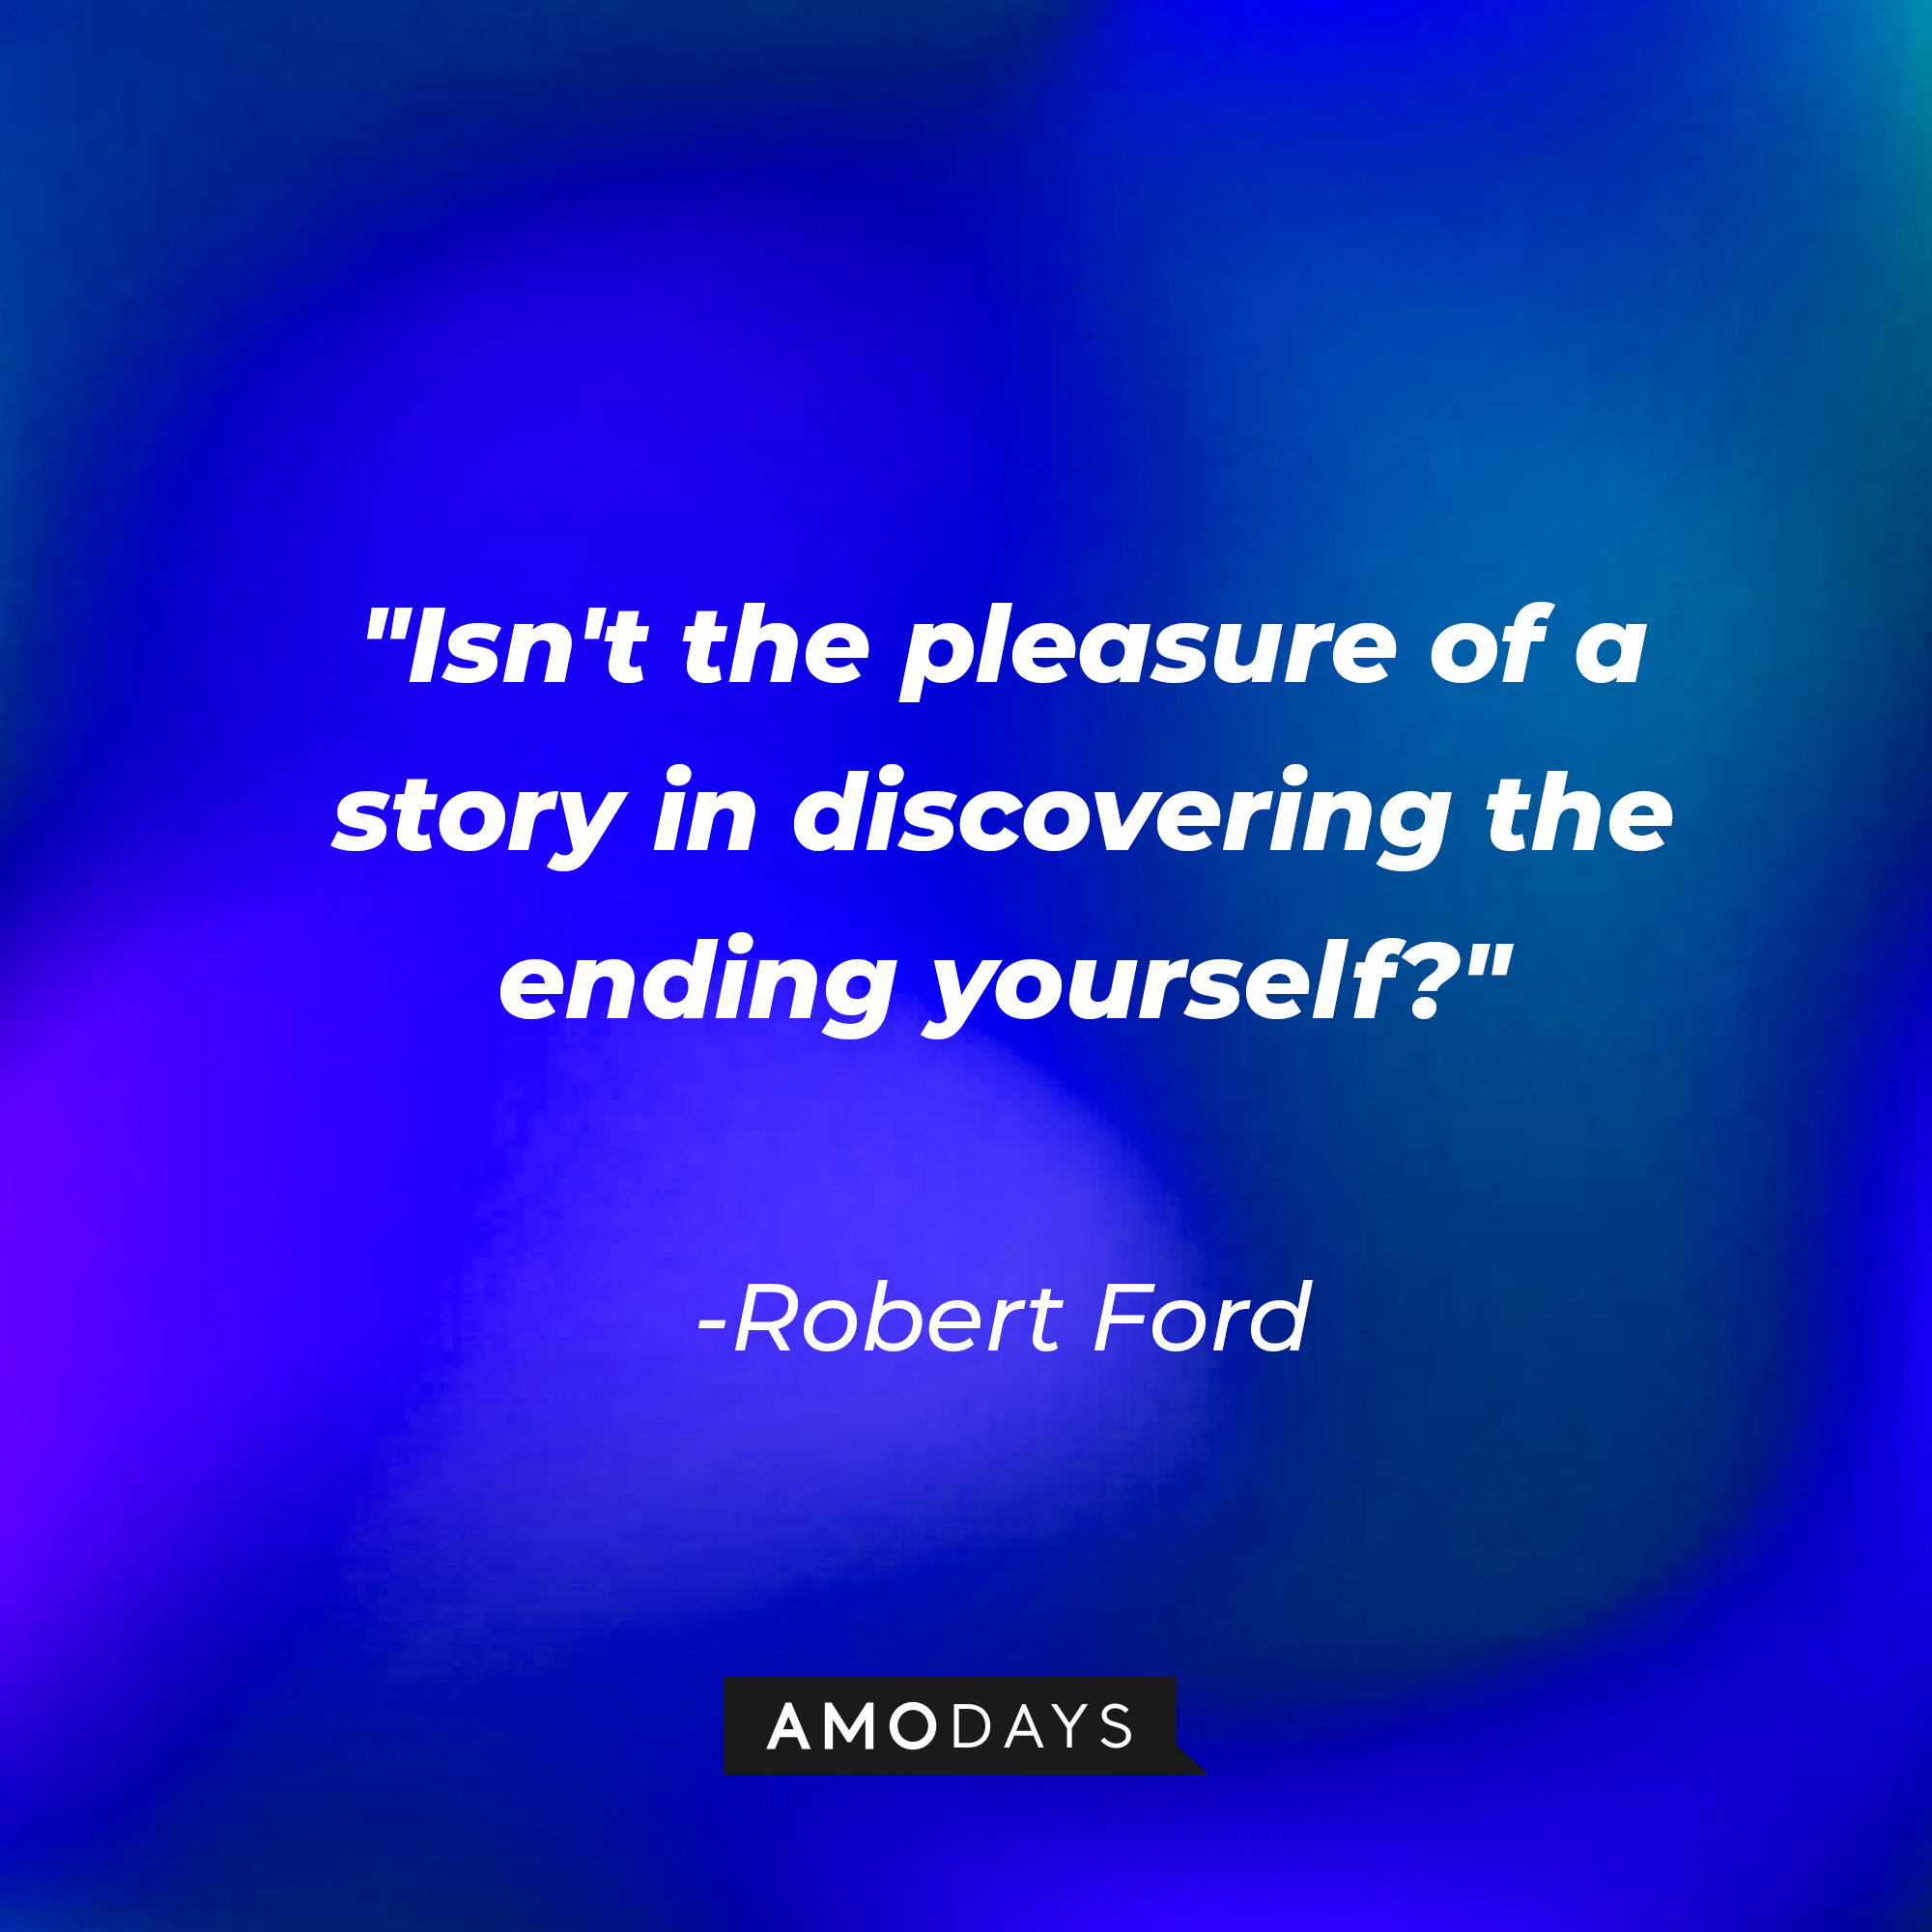 Robert Ford's quote: "Isn't the pleasure of a story in discovering the ending yourself?" | Source: AmoDays